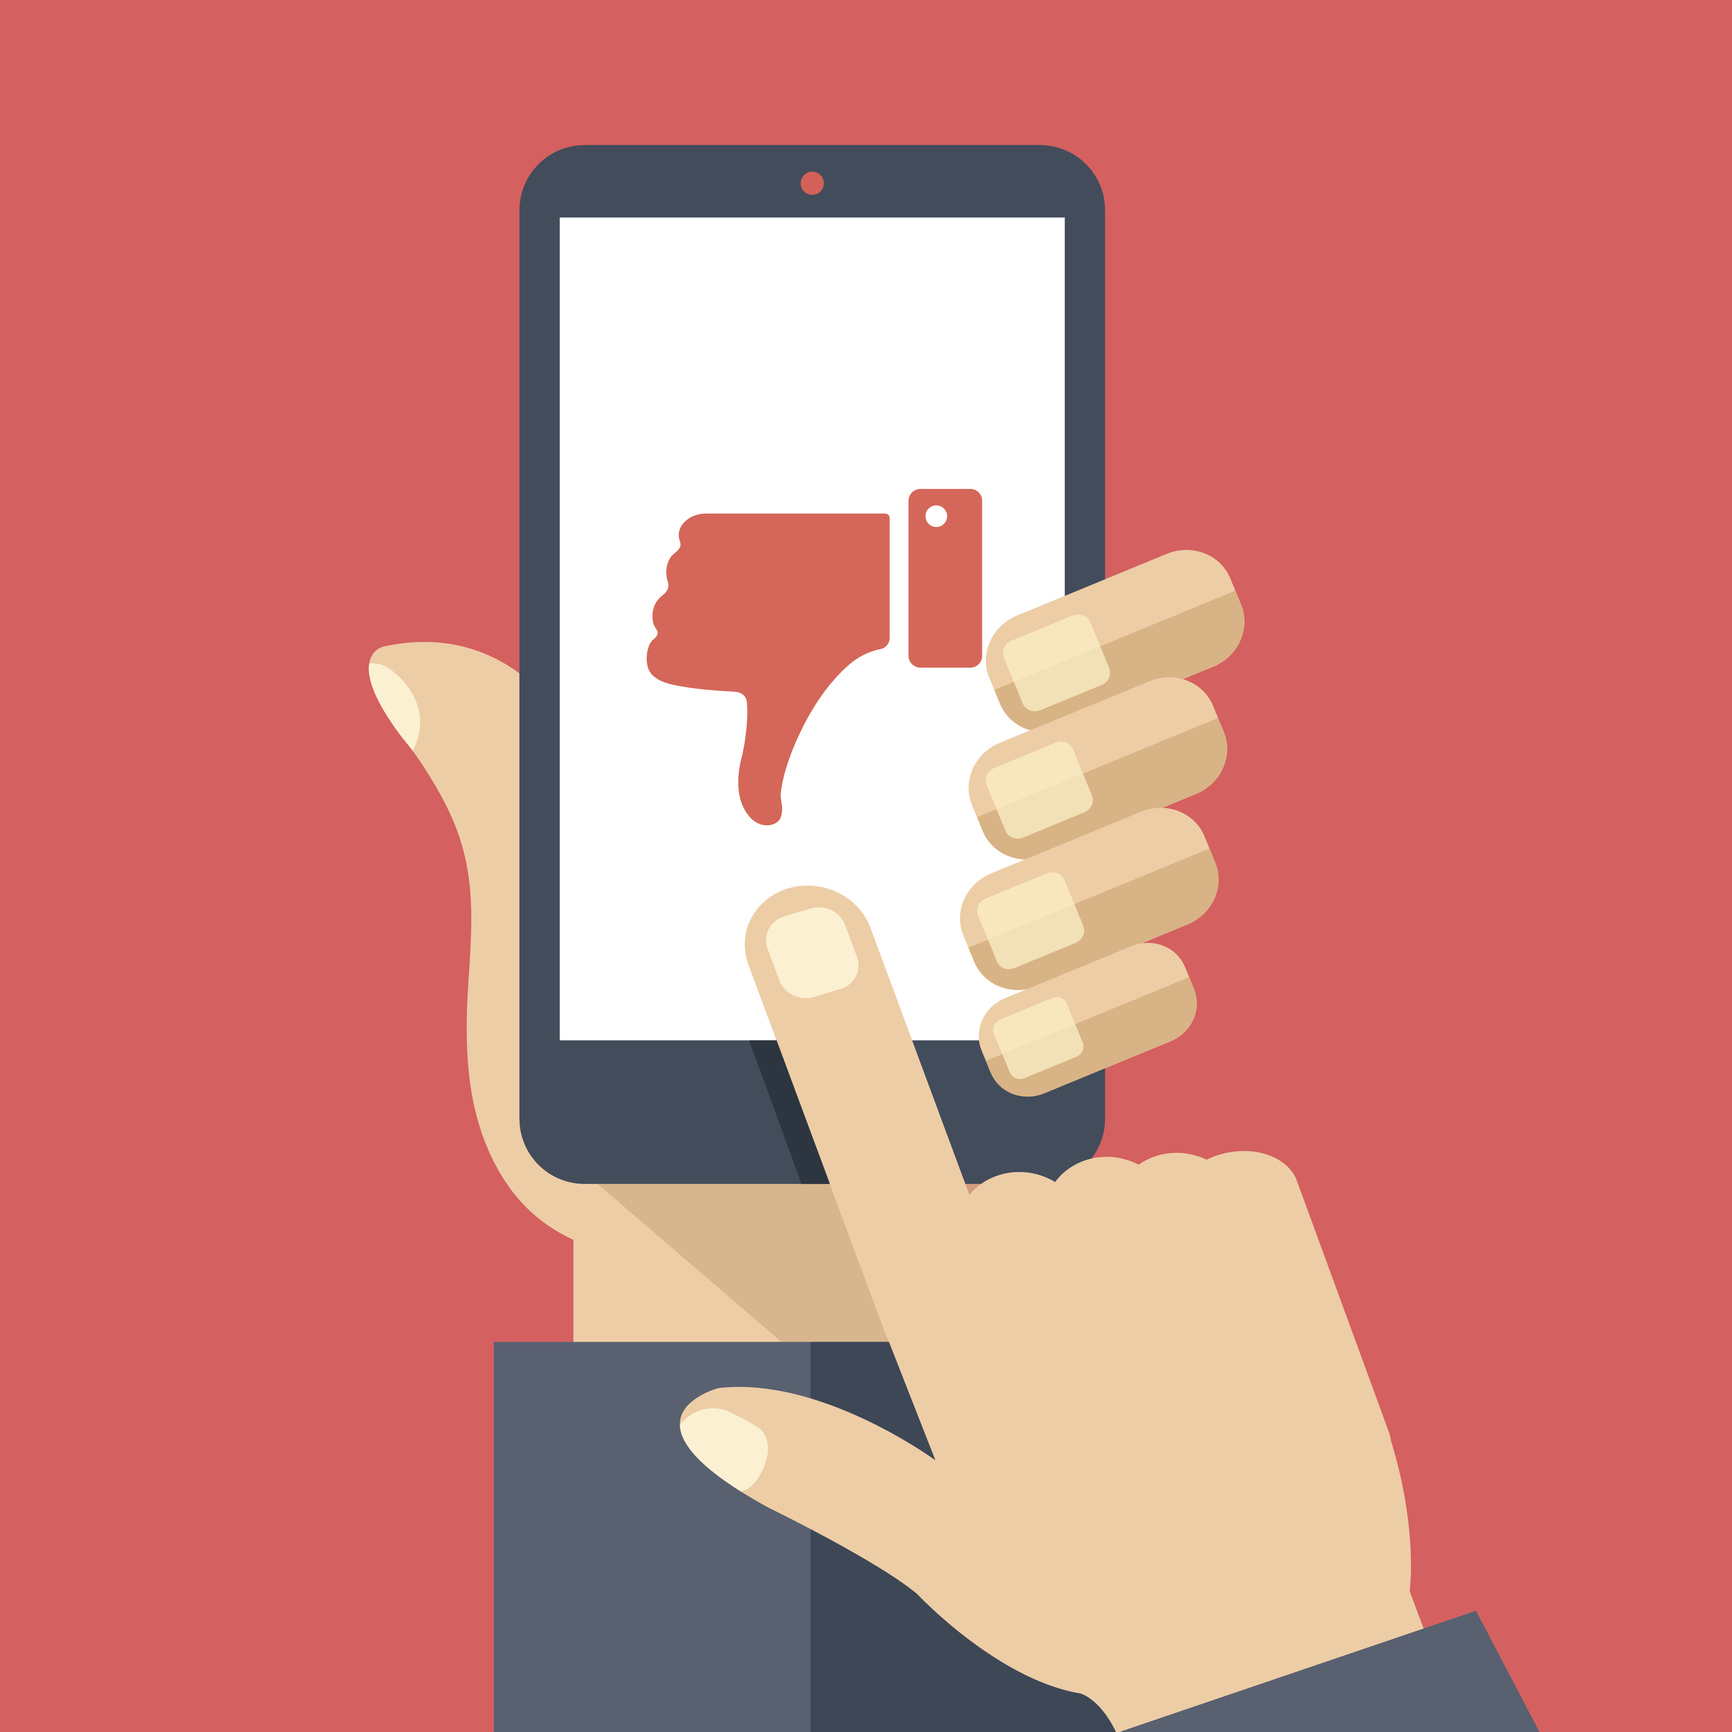 Hand holding smartphone with red dislike on screen. Social network and media on mobile phone. Modern graphic elements for web banners, web design, printed materials. Flat design vector illustration